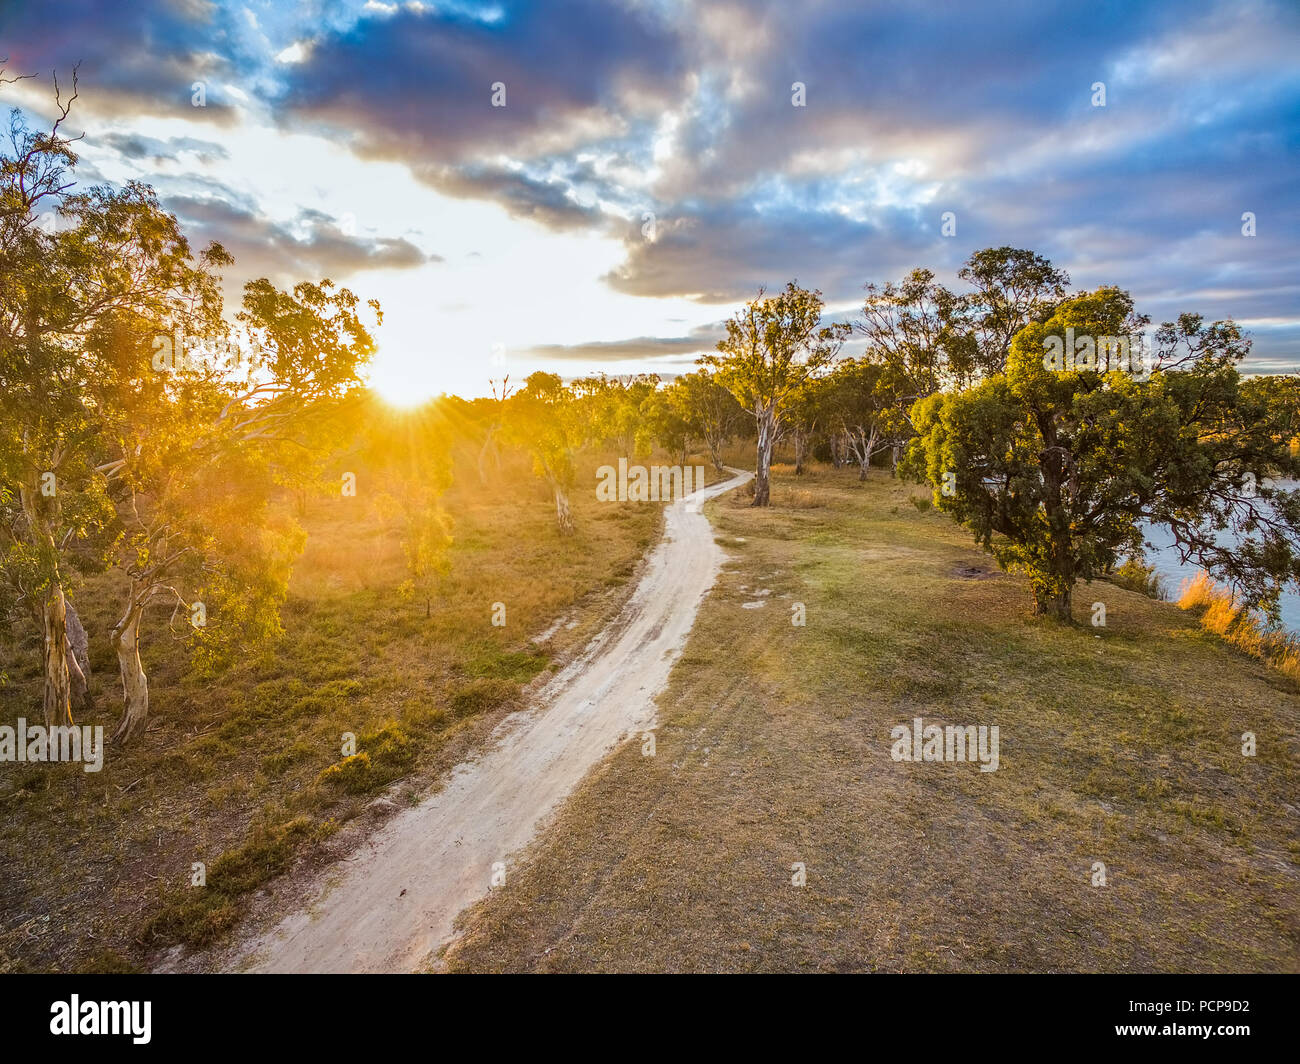 Winding dirt road among eucalyptus trees at sunset with sun flare Stock Photo